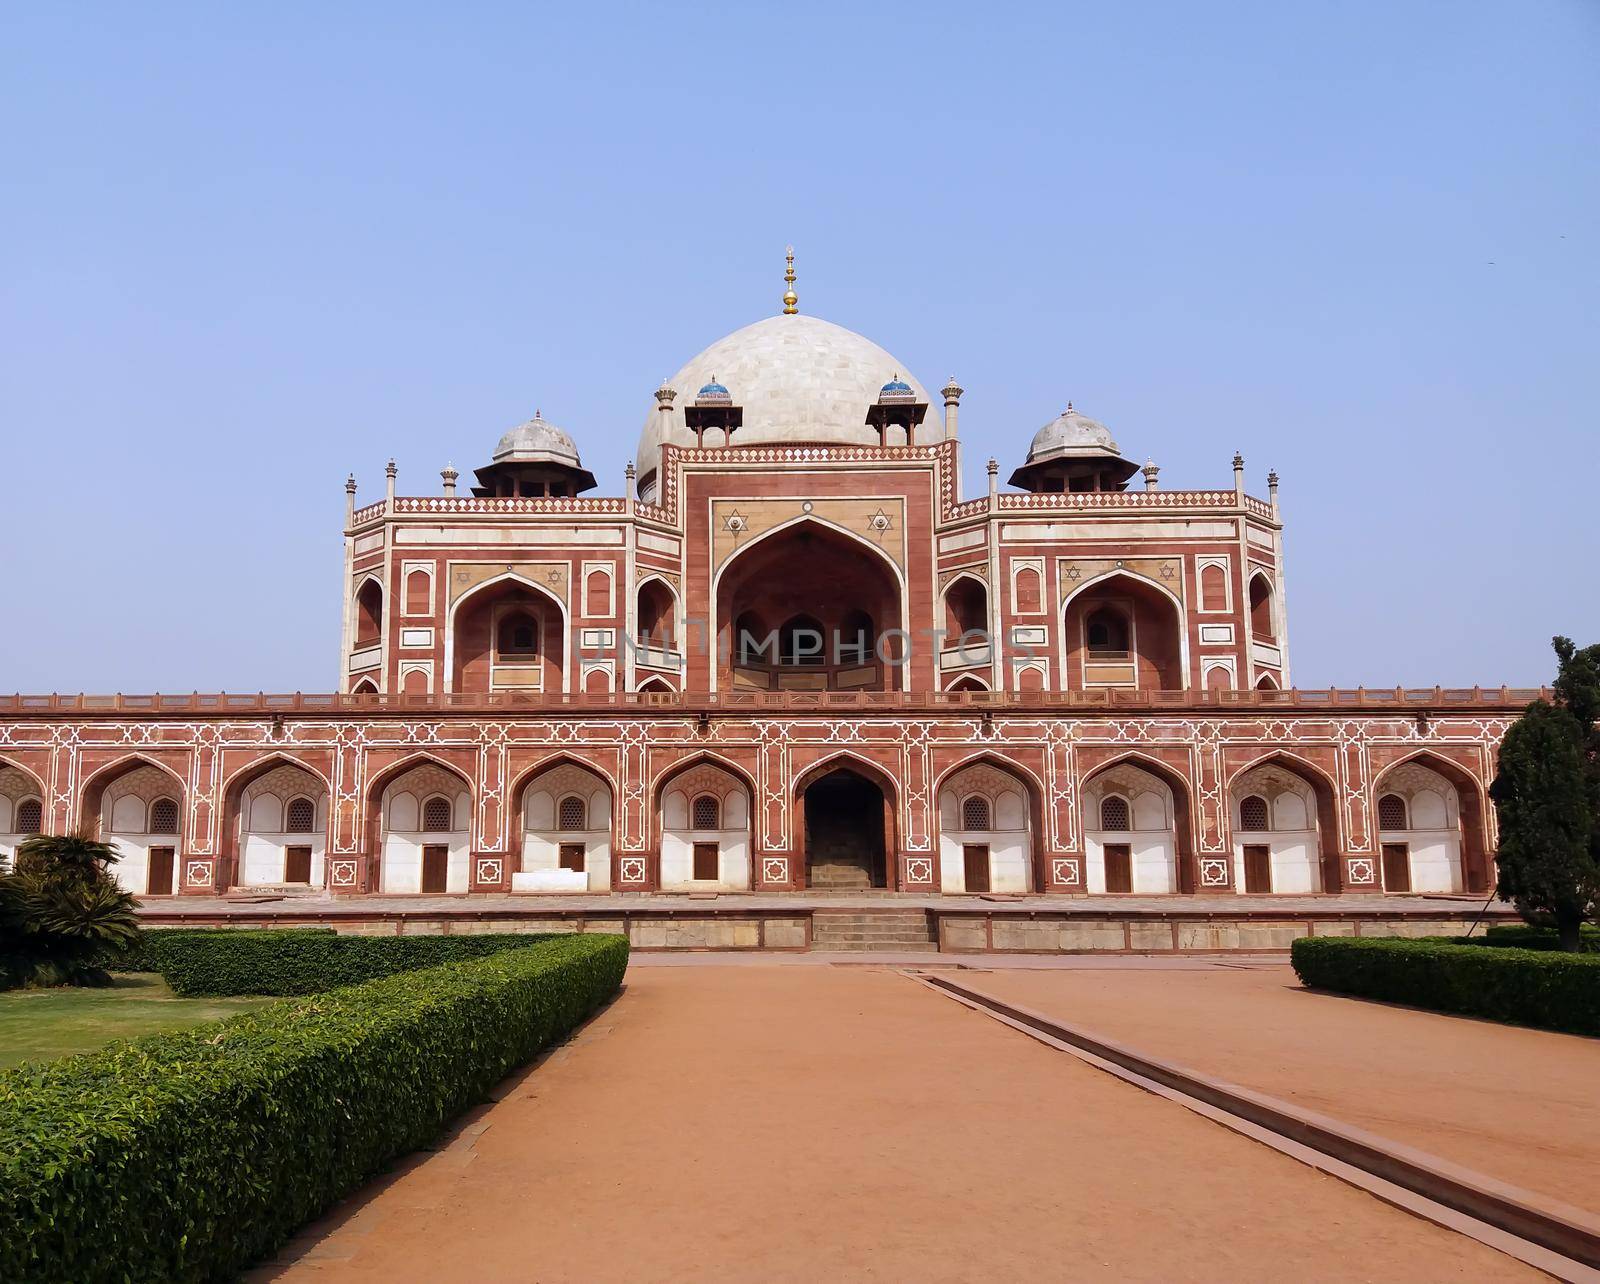 Delhi, India - Feb 13, 2021: Facade of Humayun’s Tomb against a blue sky in Delhi by tabishere